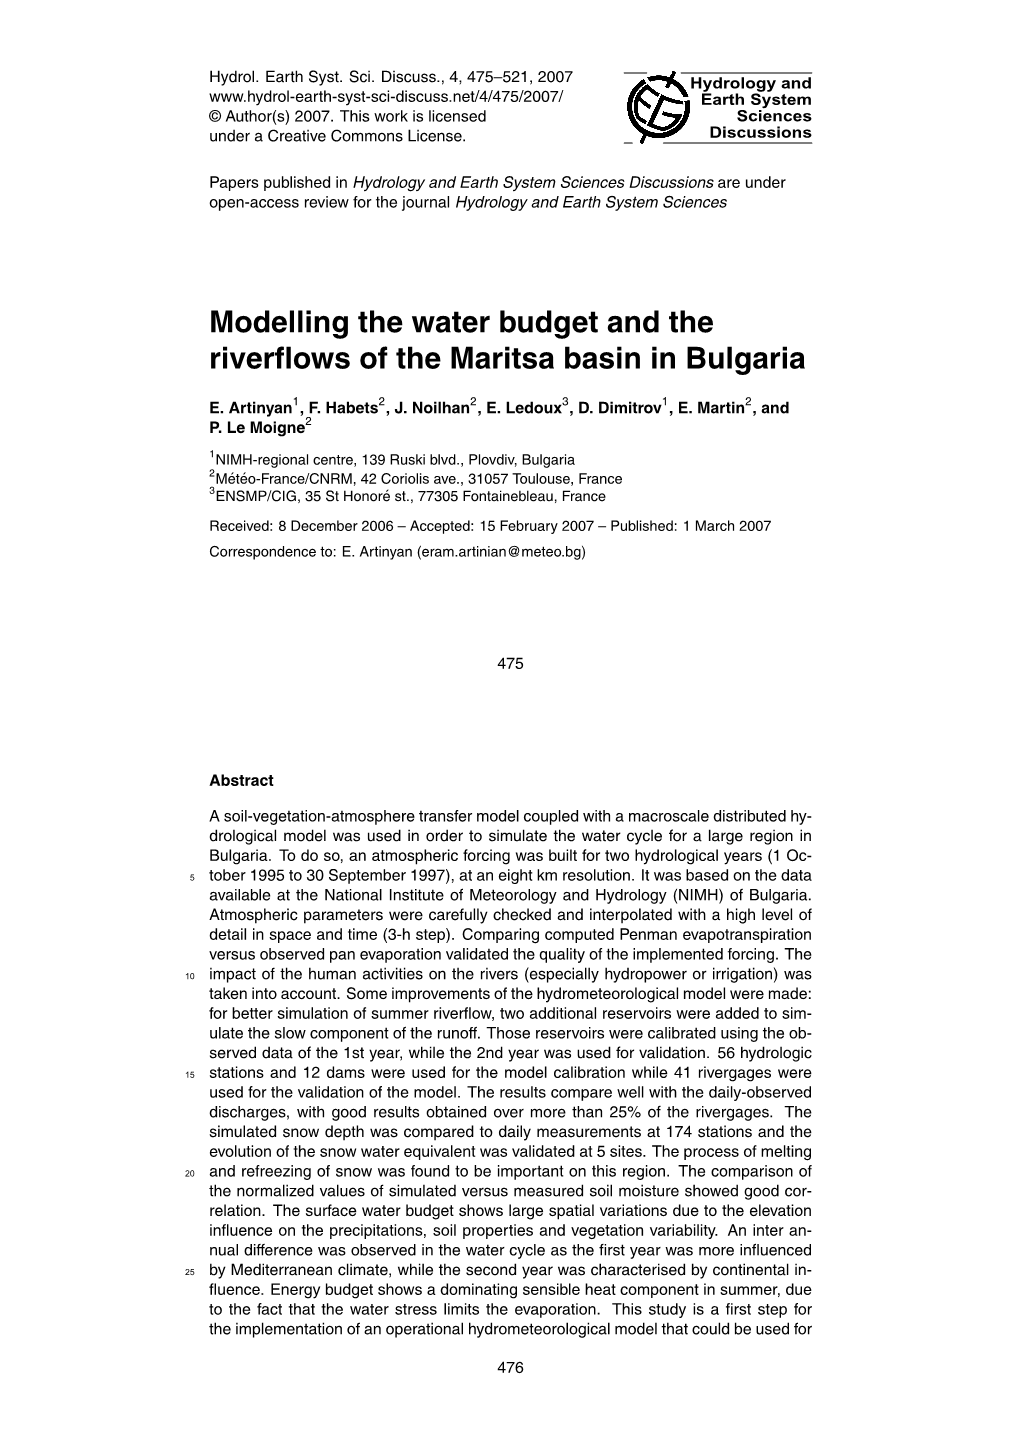 Modelling the Water Budget and the Riverflows of the Maritsa Basin In